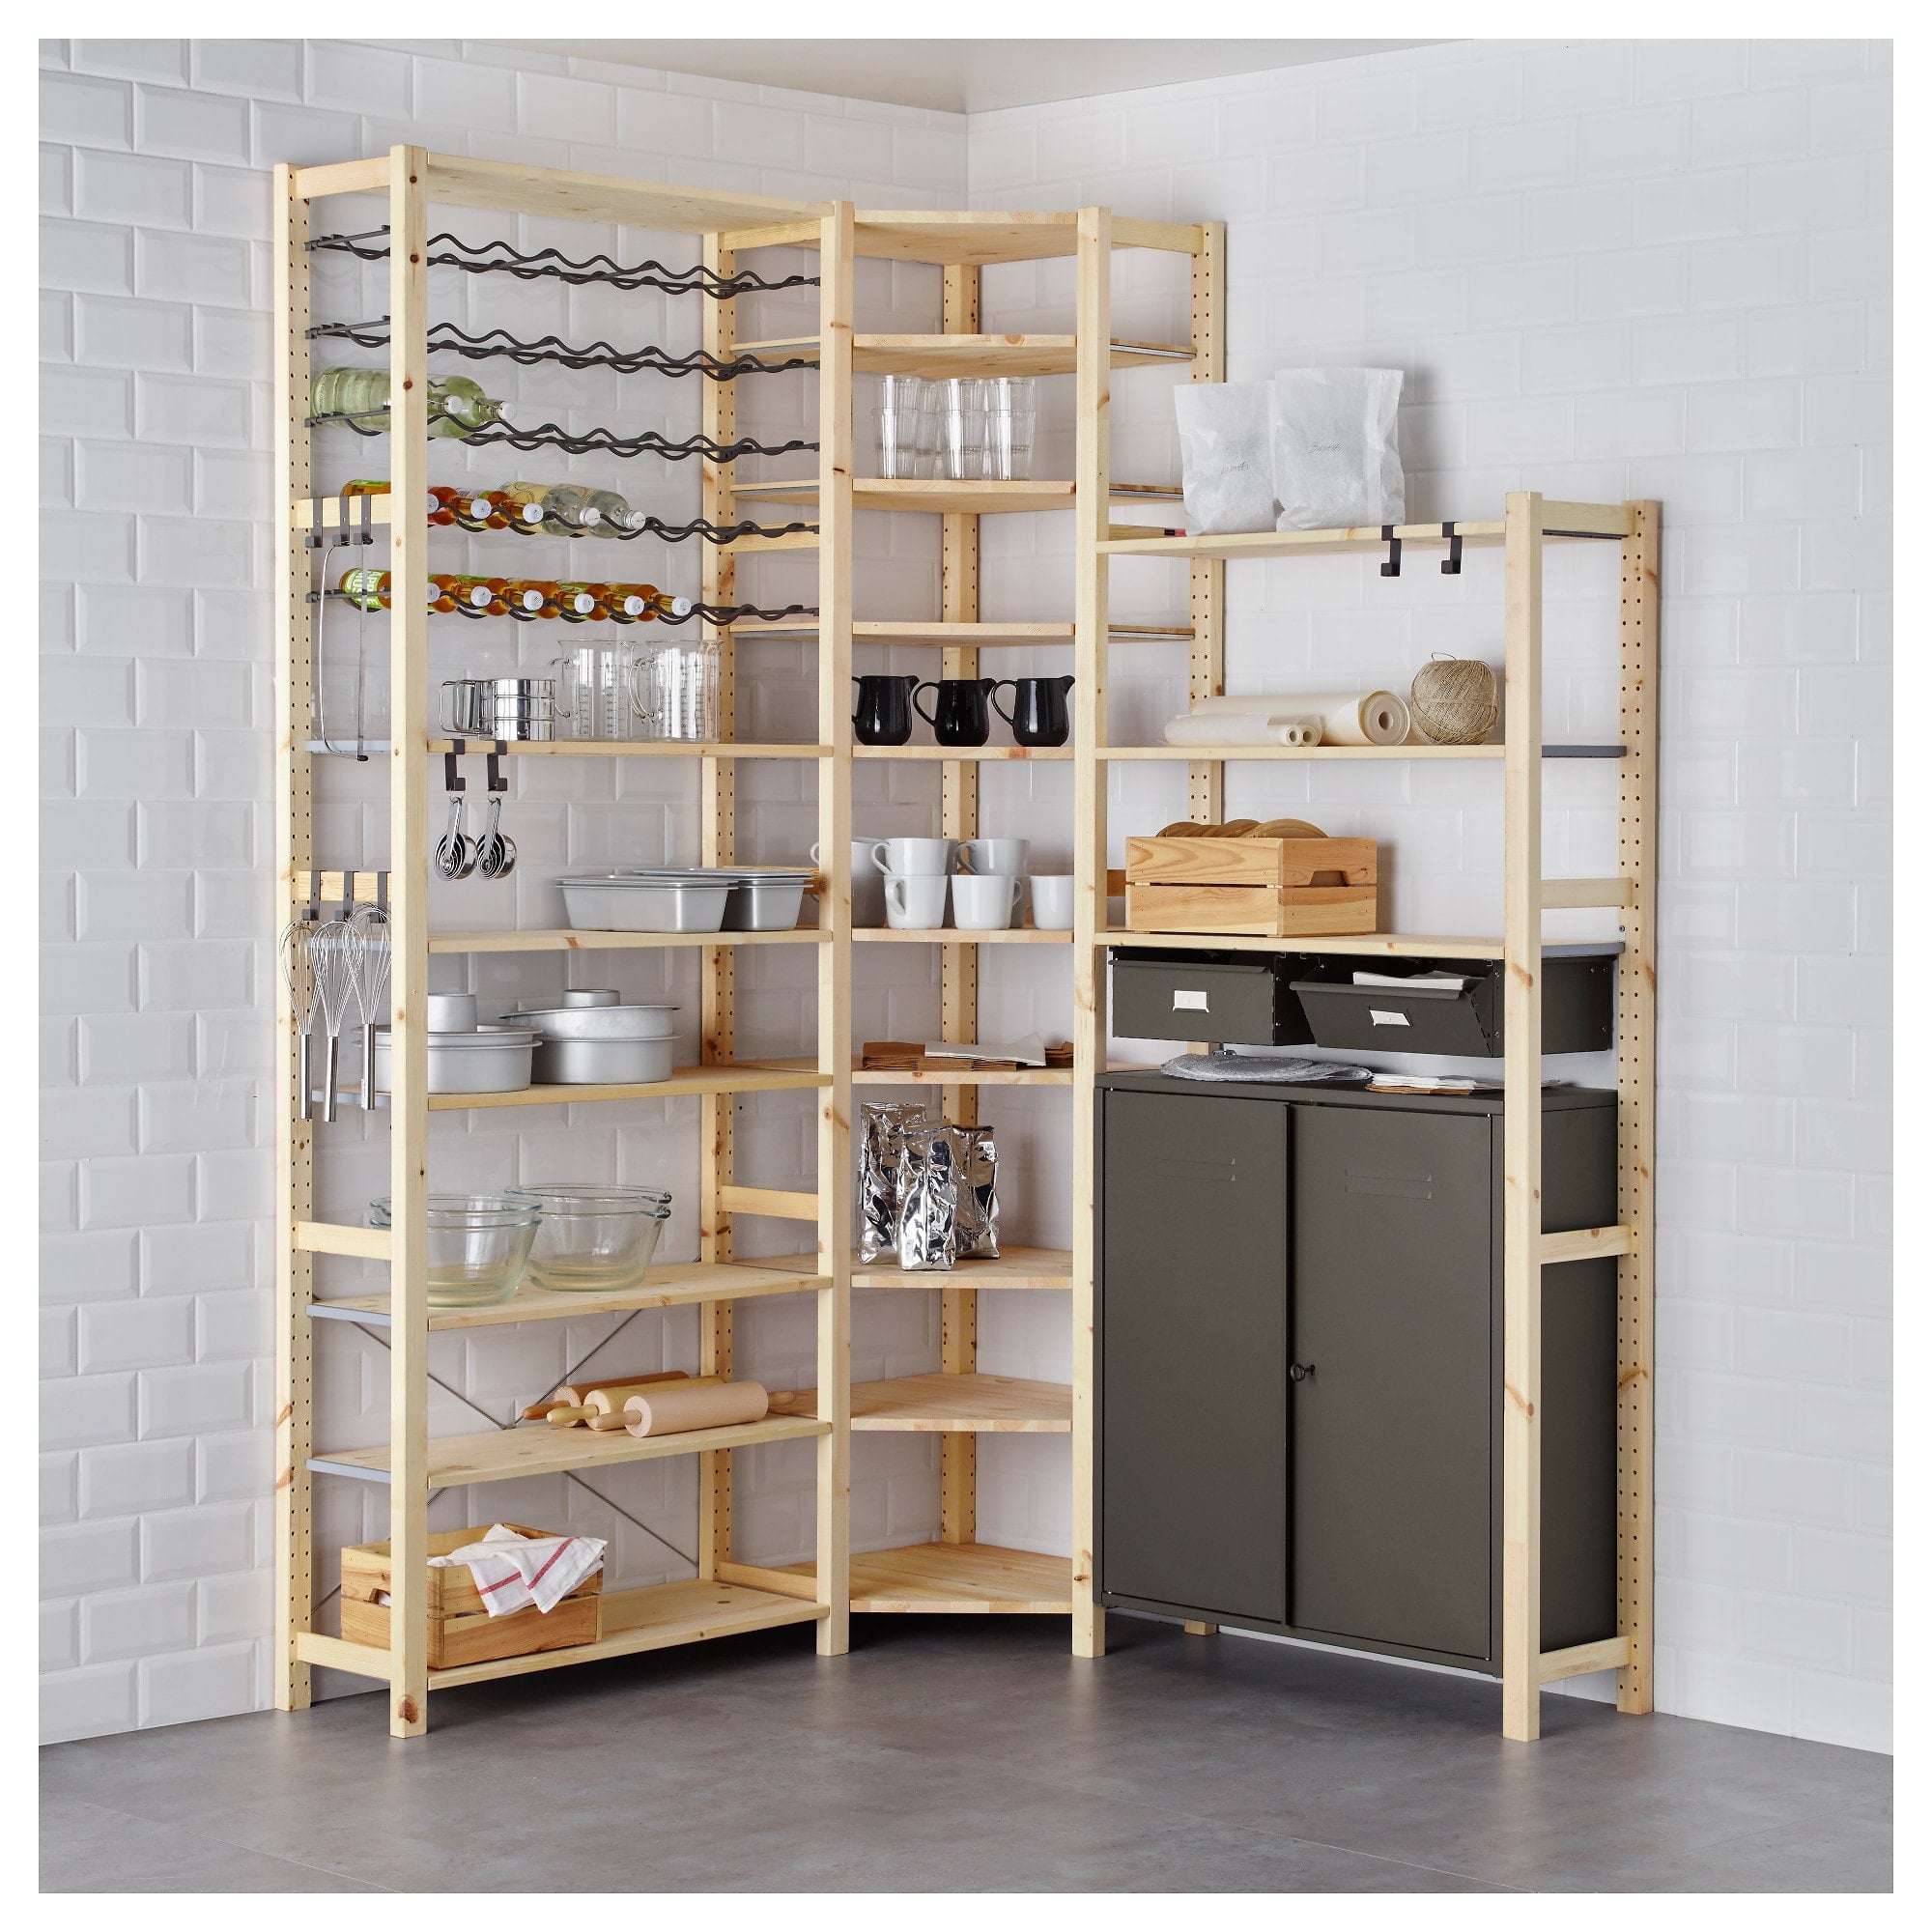 Ivar 3 Section Shelving Unit With Cabinets Pots And Pans